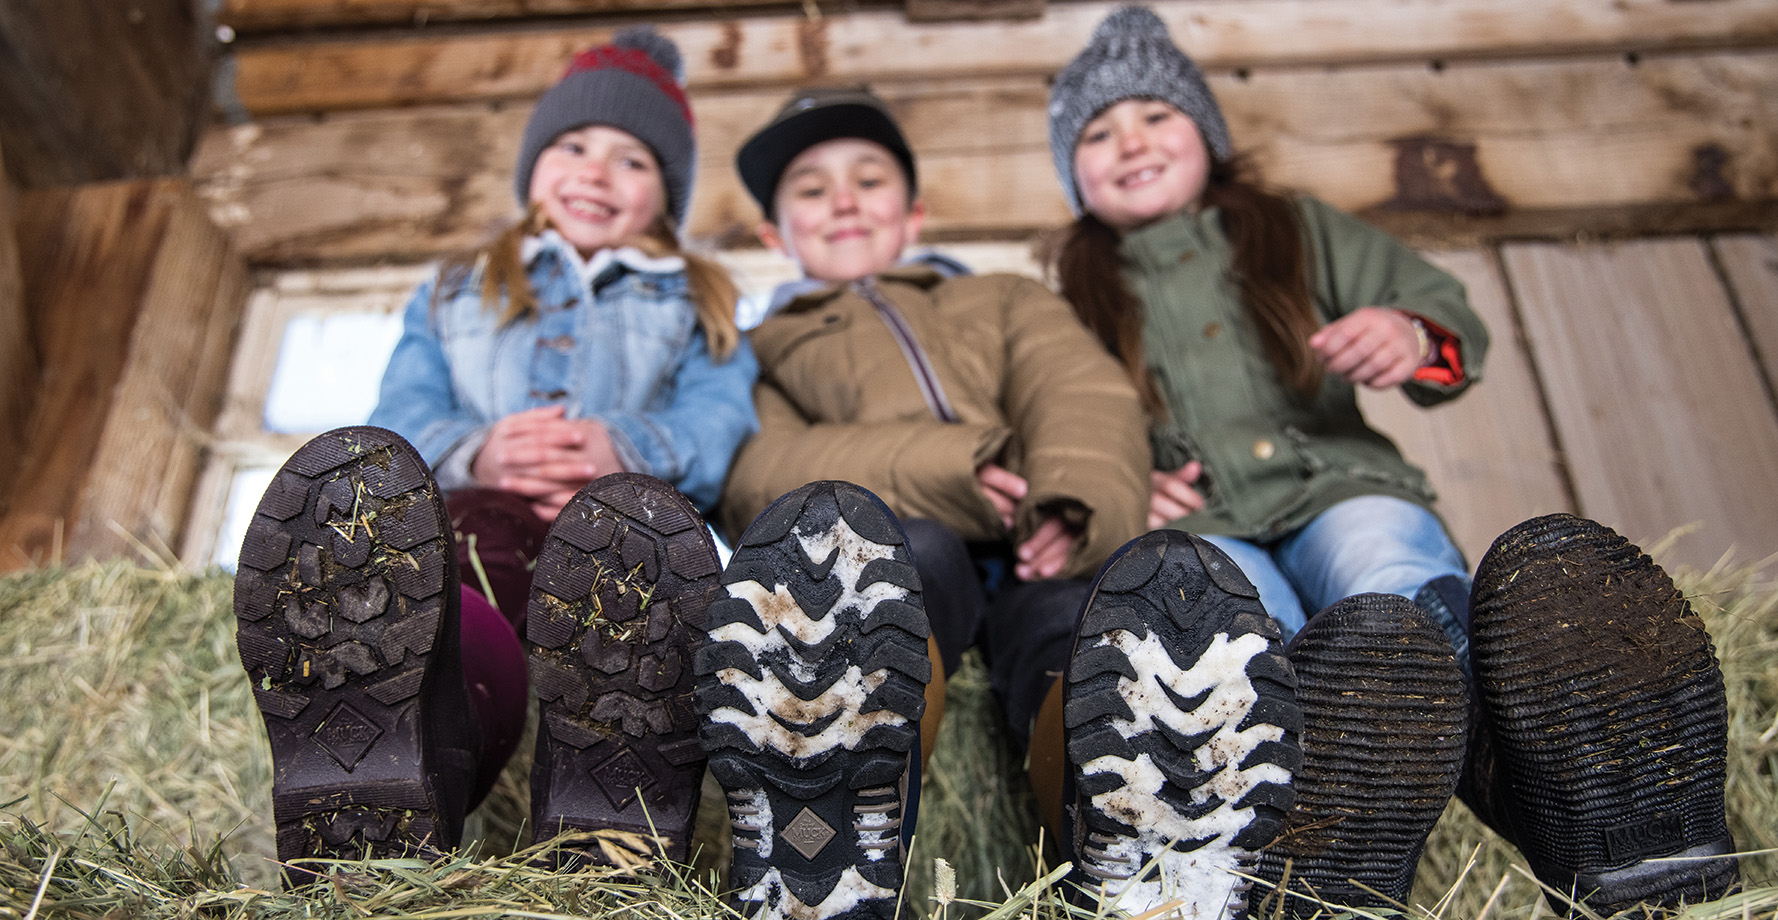 Children with Muck boots on sitting on hay bale